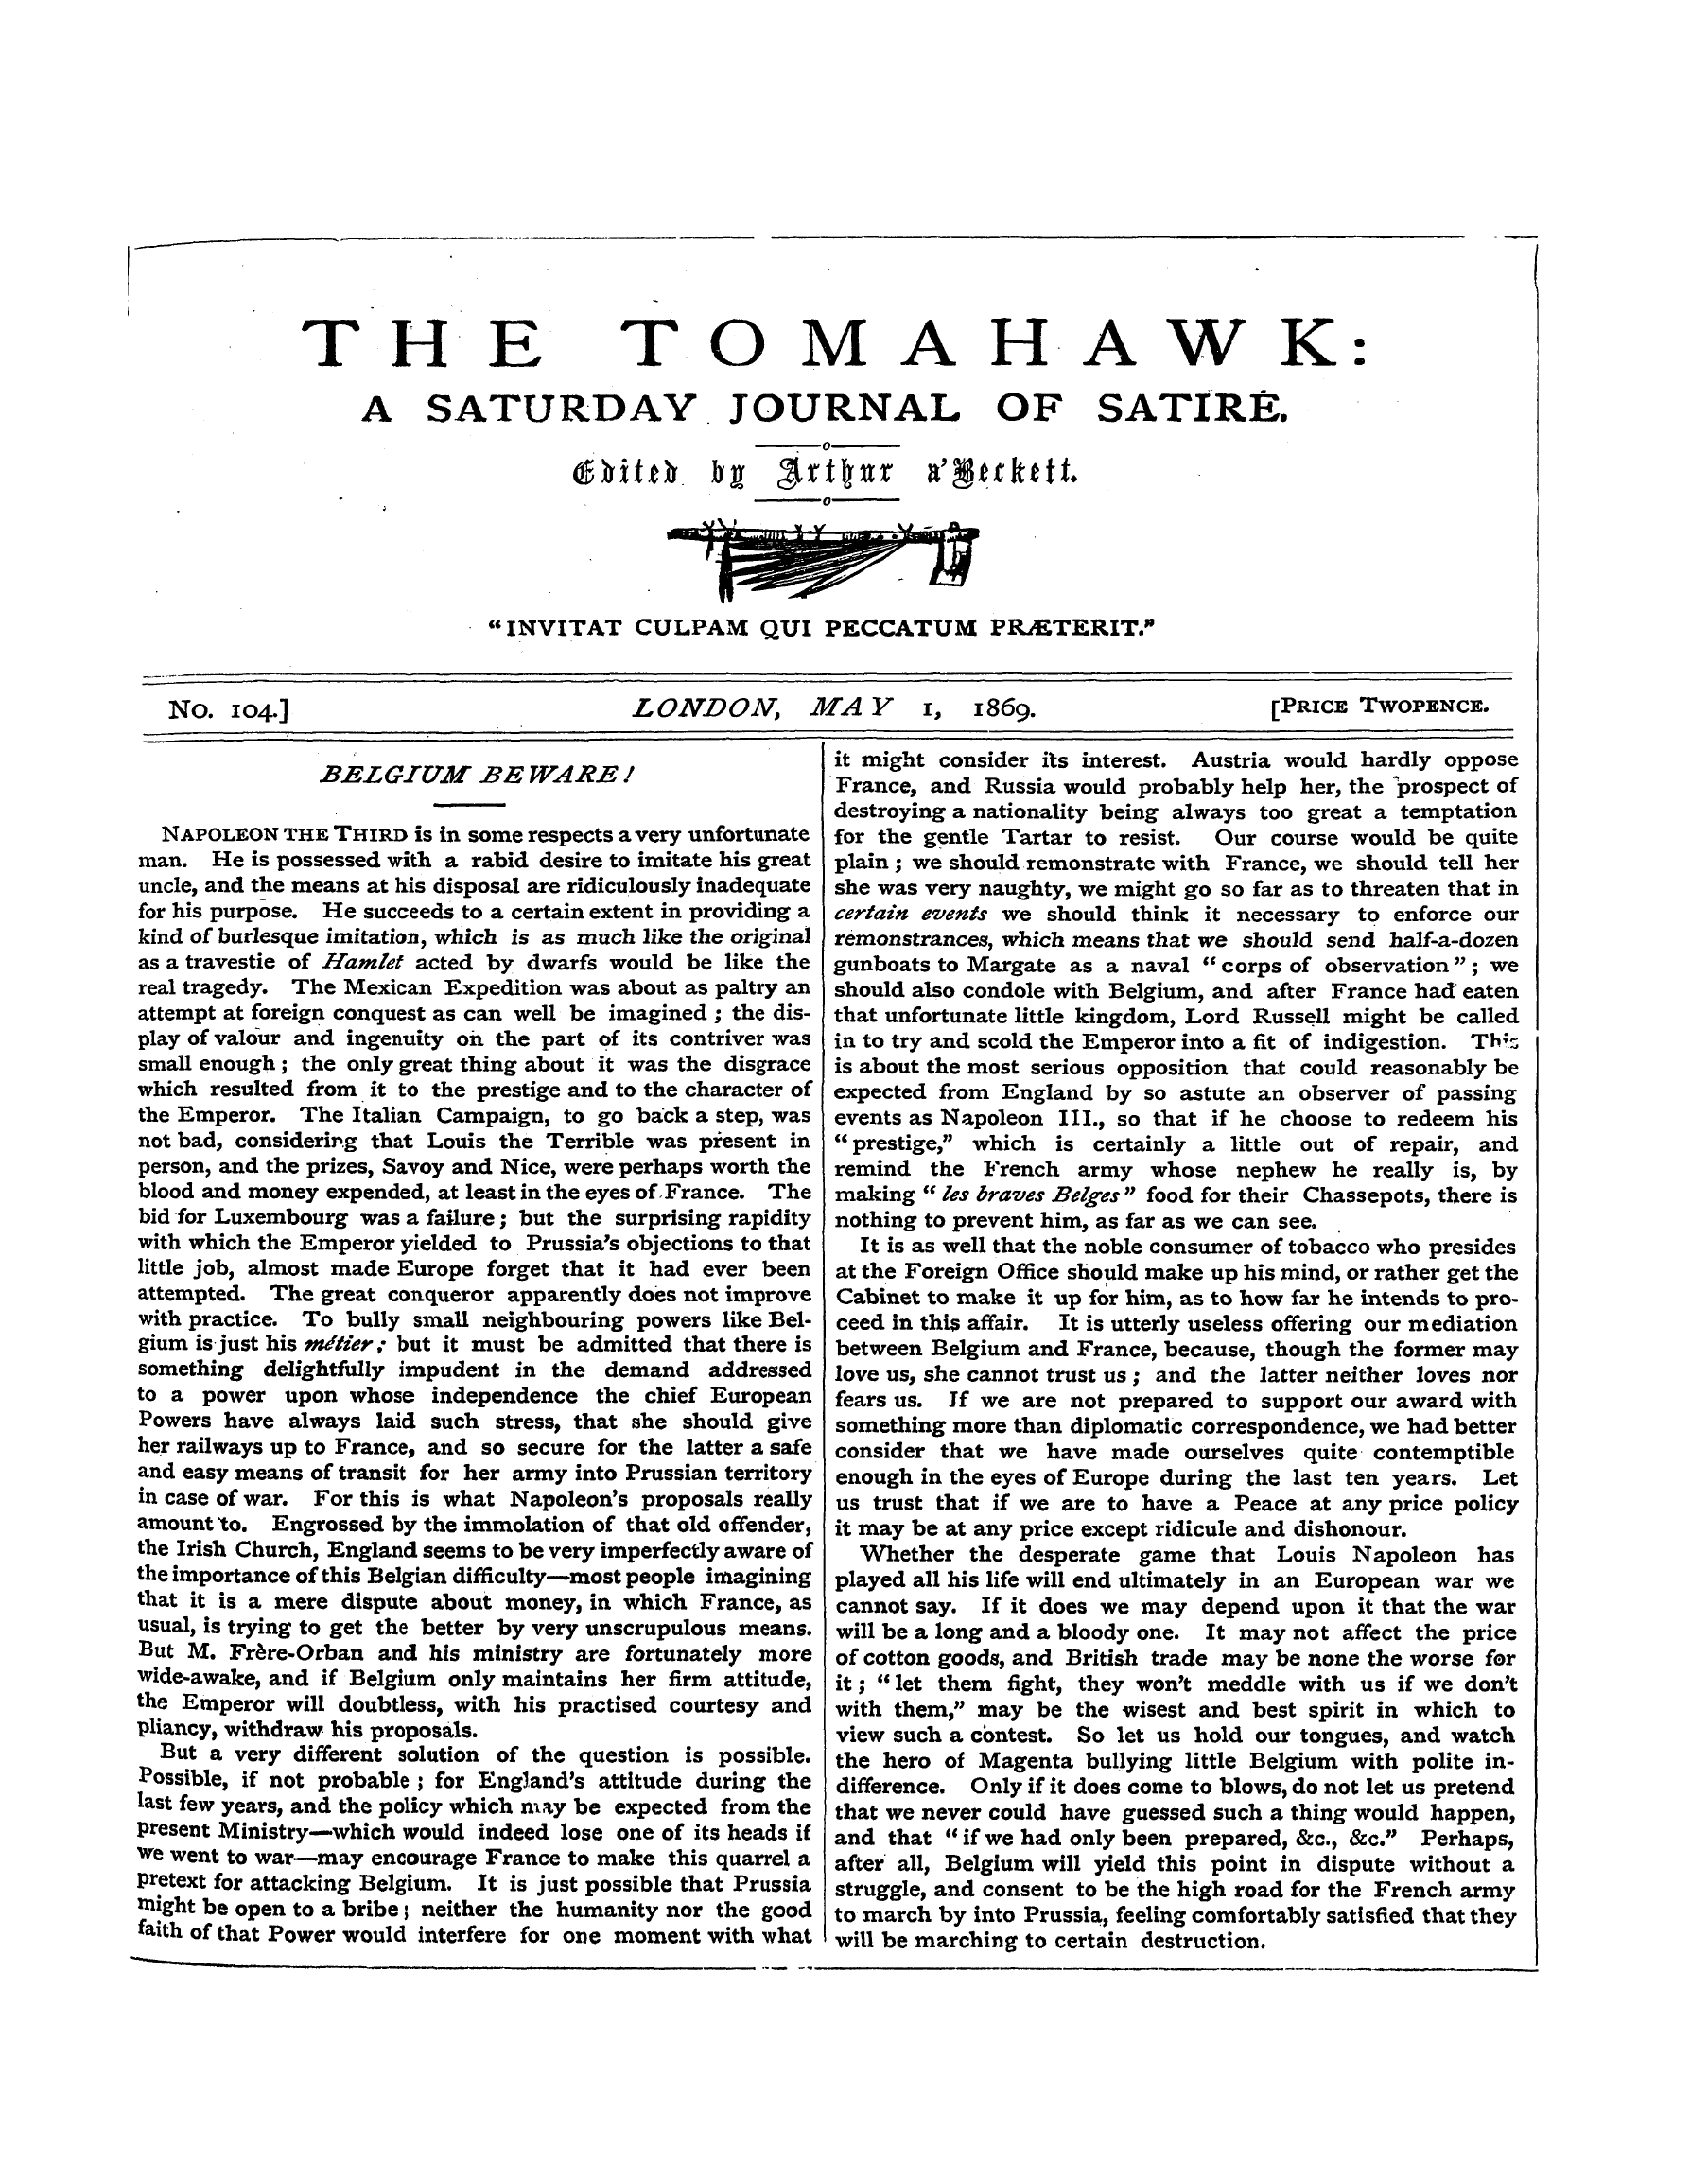 Tomahawk (1867-1870): jS F Y, 1st edition - Napoleon The Third Is In Some Respects A...